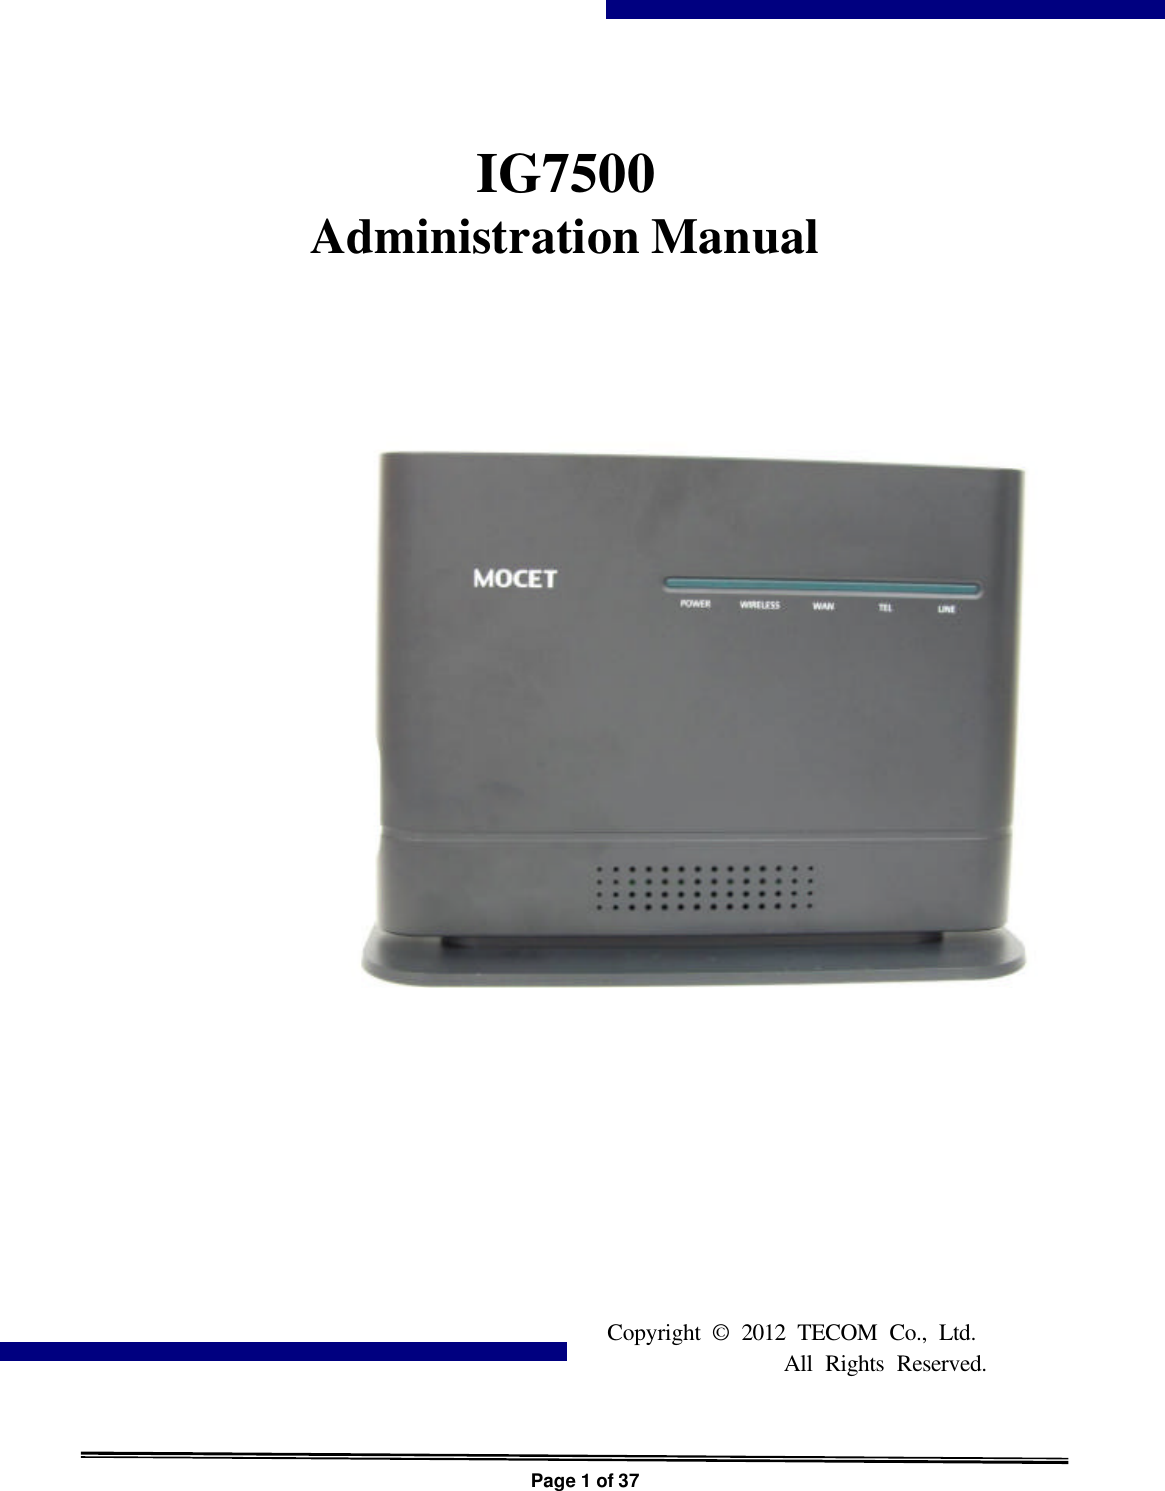  Page 1 of 37                IG7500 Administration Manual Copyright © 2012 TECOM Co., Ltd. All Rights Reserved. 